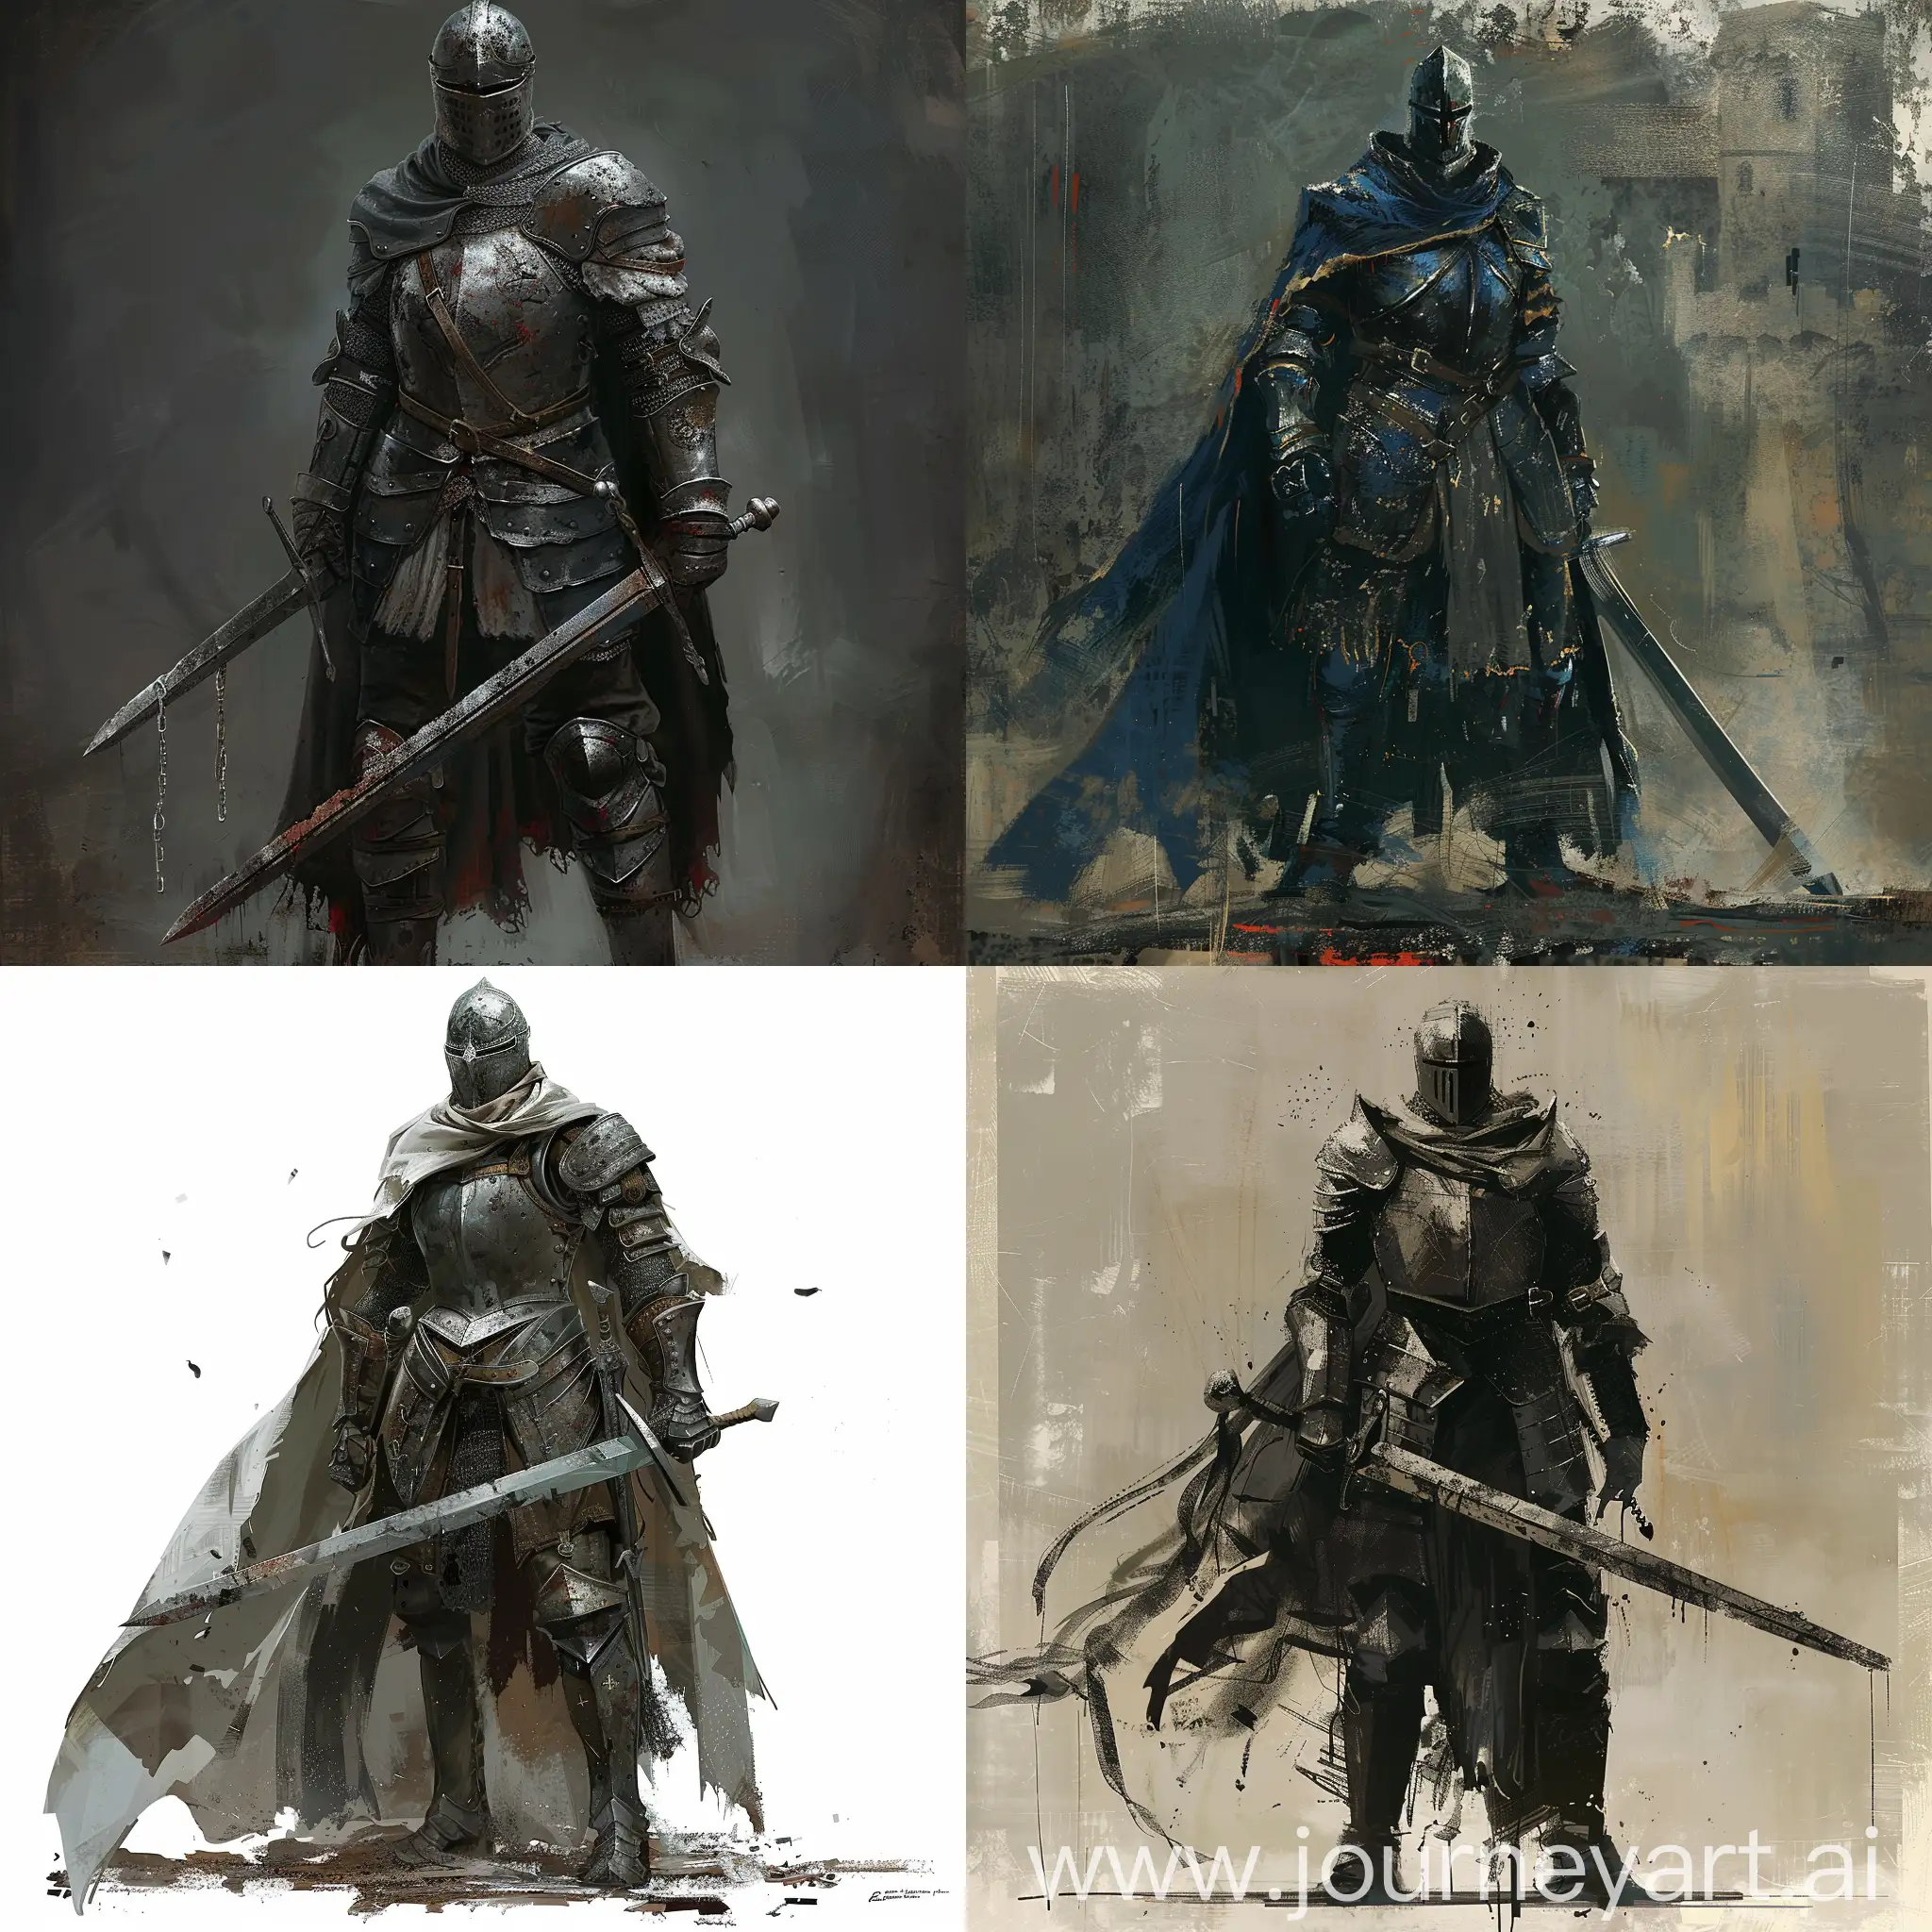 Medieval-Knight-Concept-Art-Inspired-by-Dark-Souls